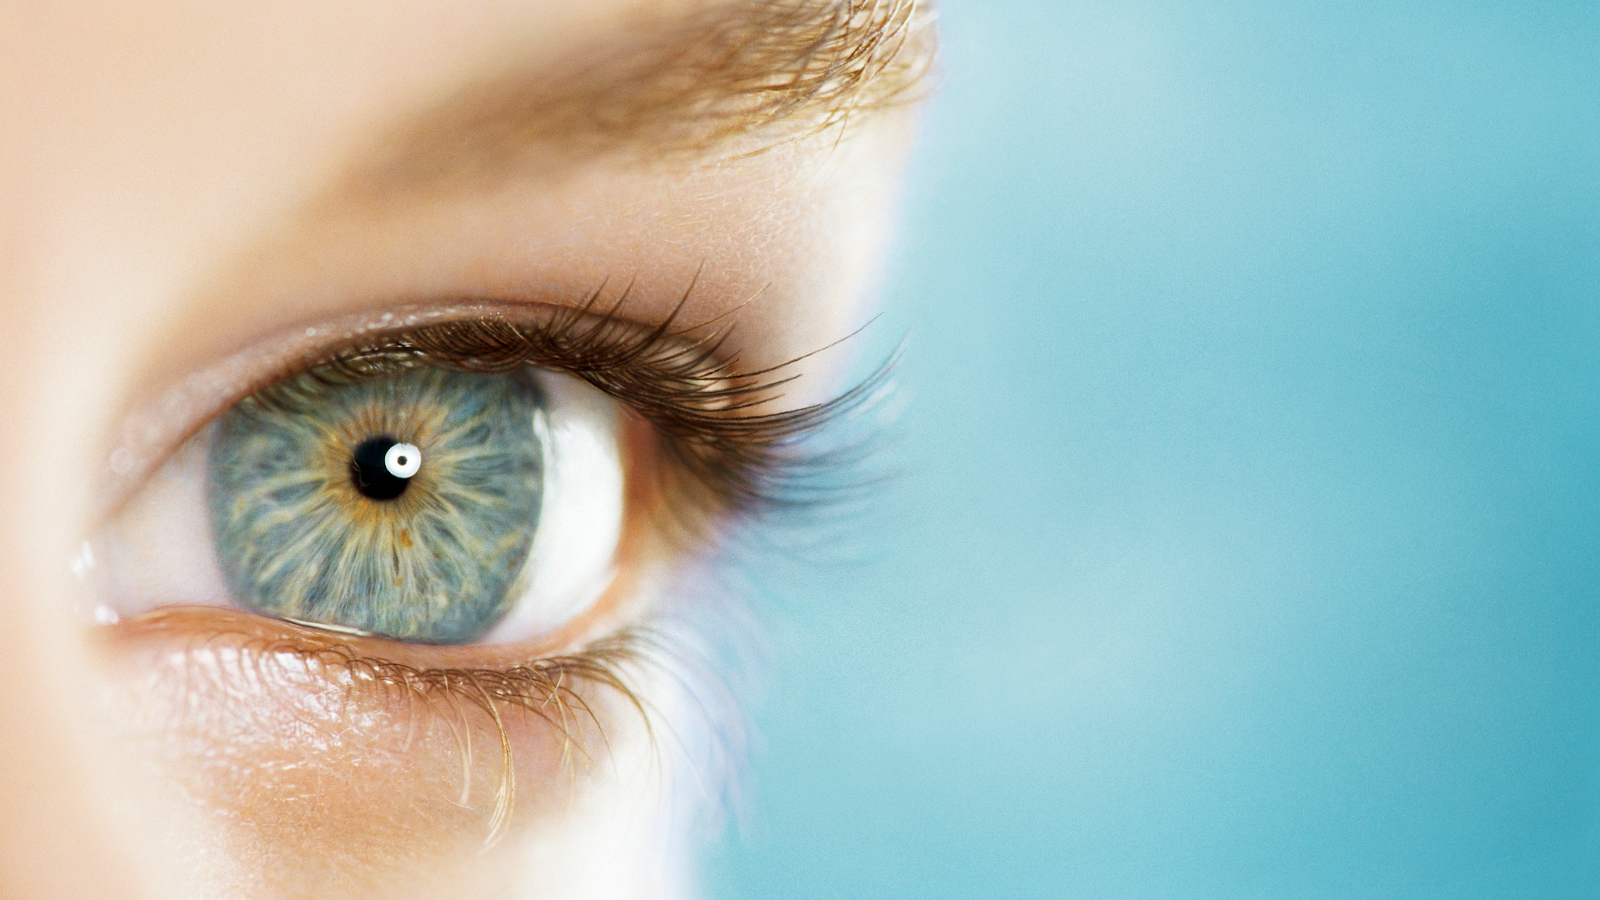 Close up of a woman blue eye on blue background